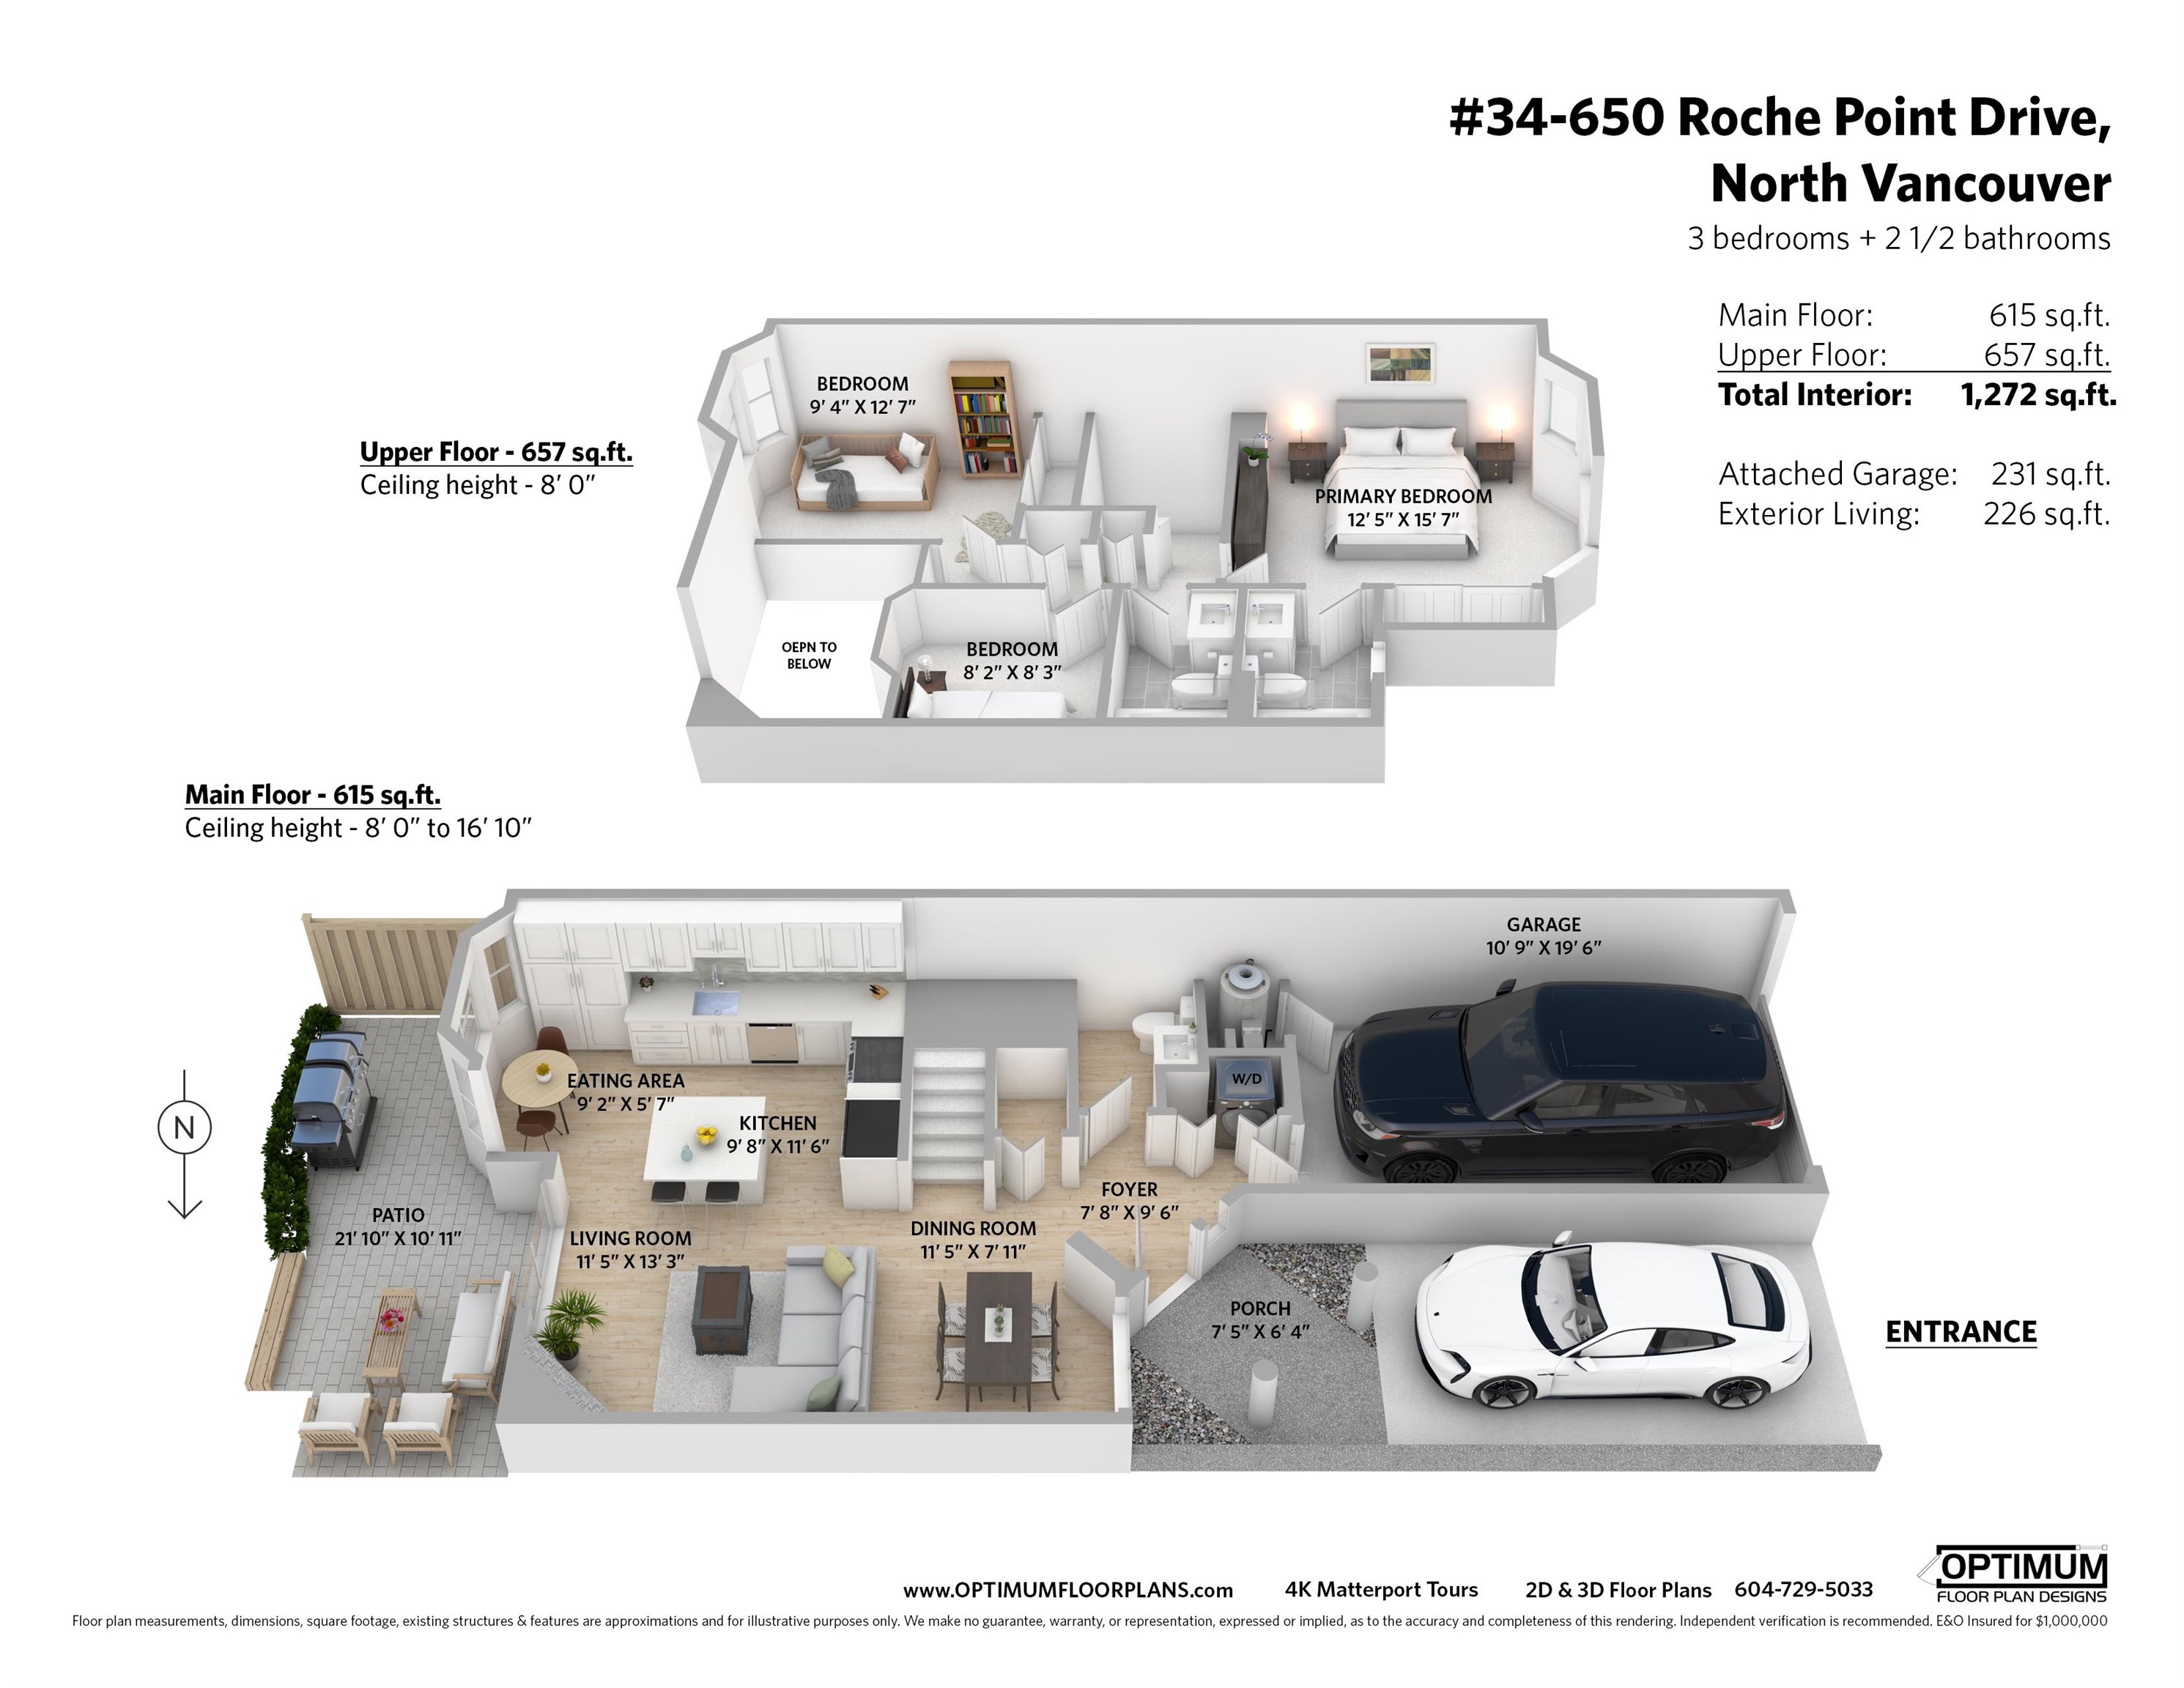 Listing image of 34 650 ROCHE POINT DRIVE